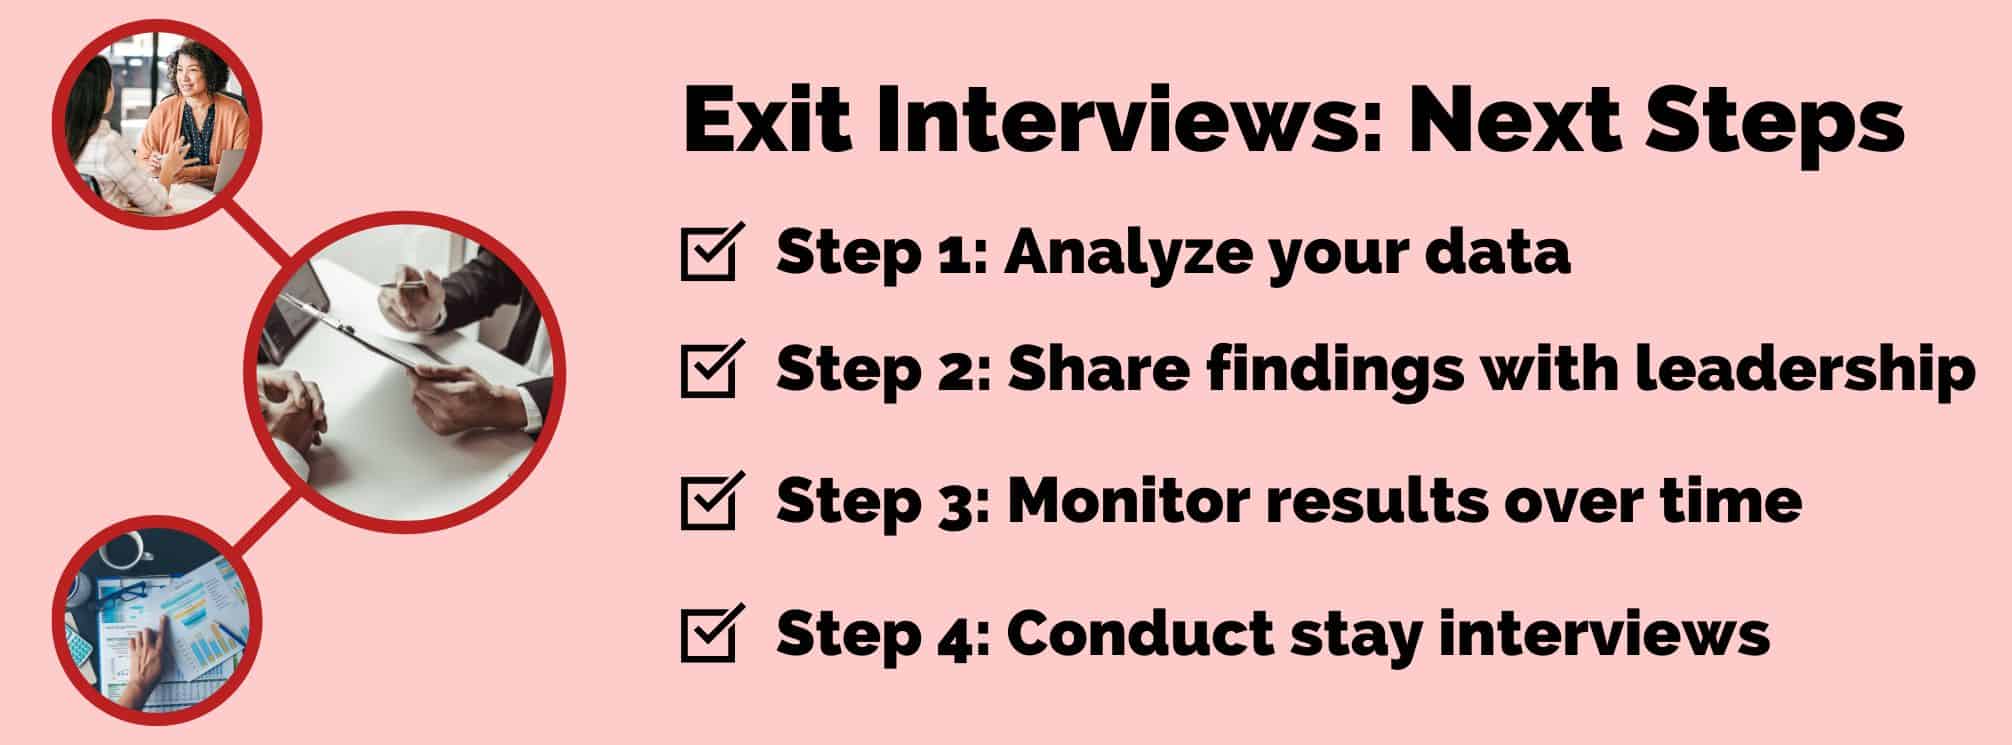 text-based graphic that says "exit interviews: next steps" and lists out the 4 steps to take after the interviews